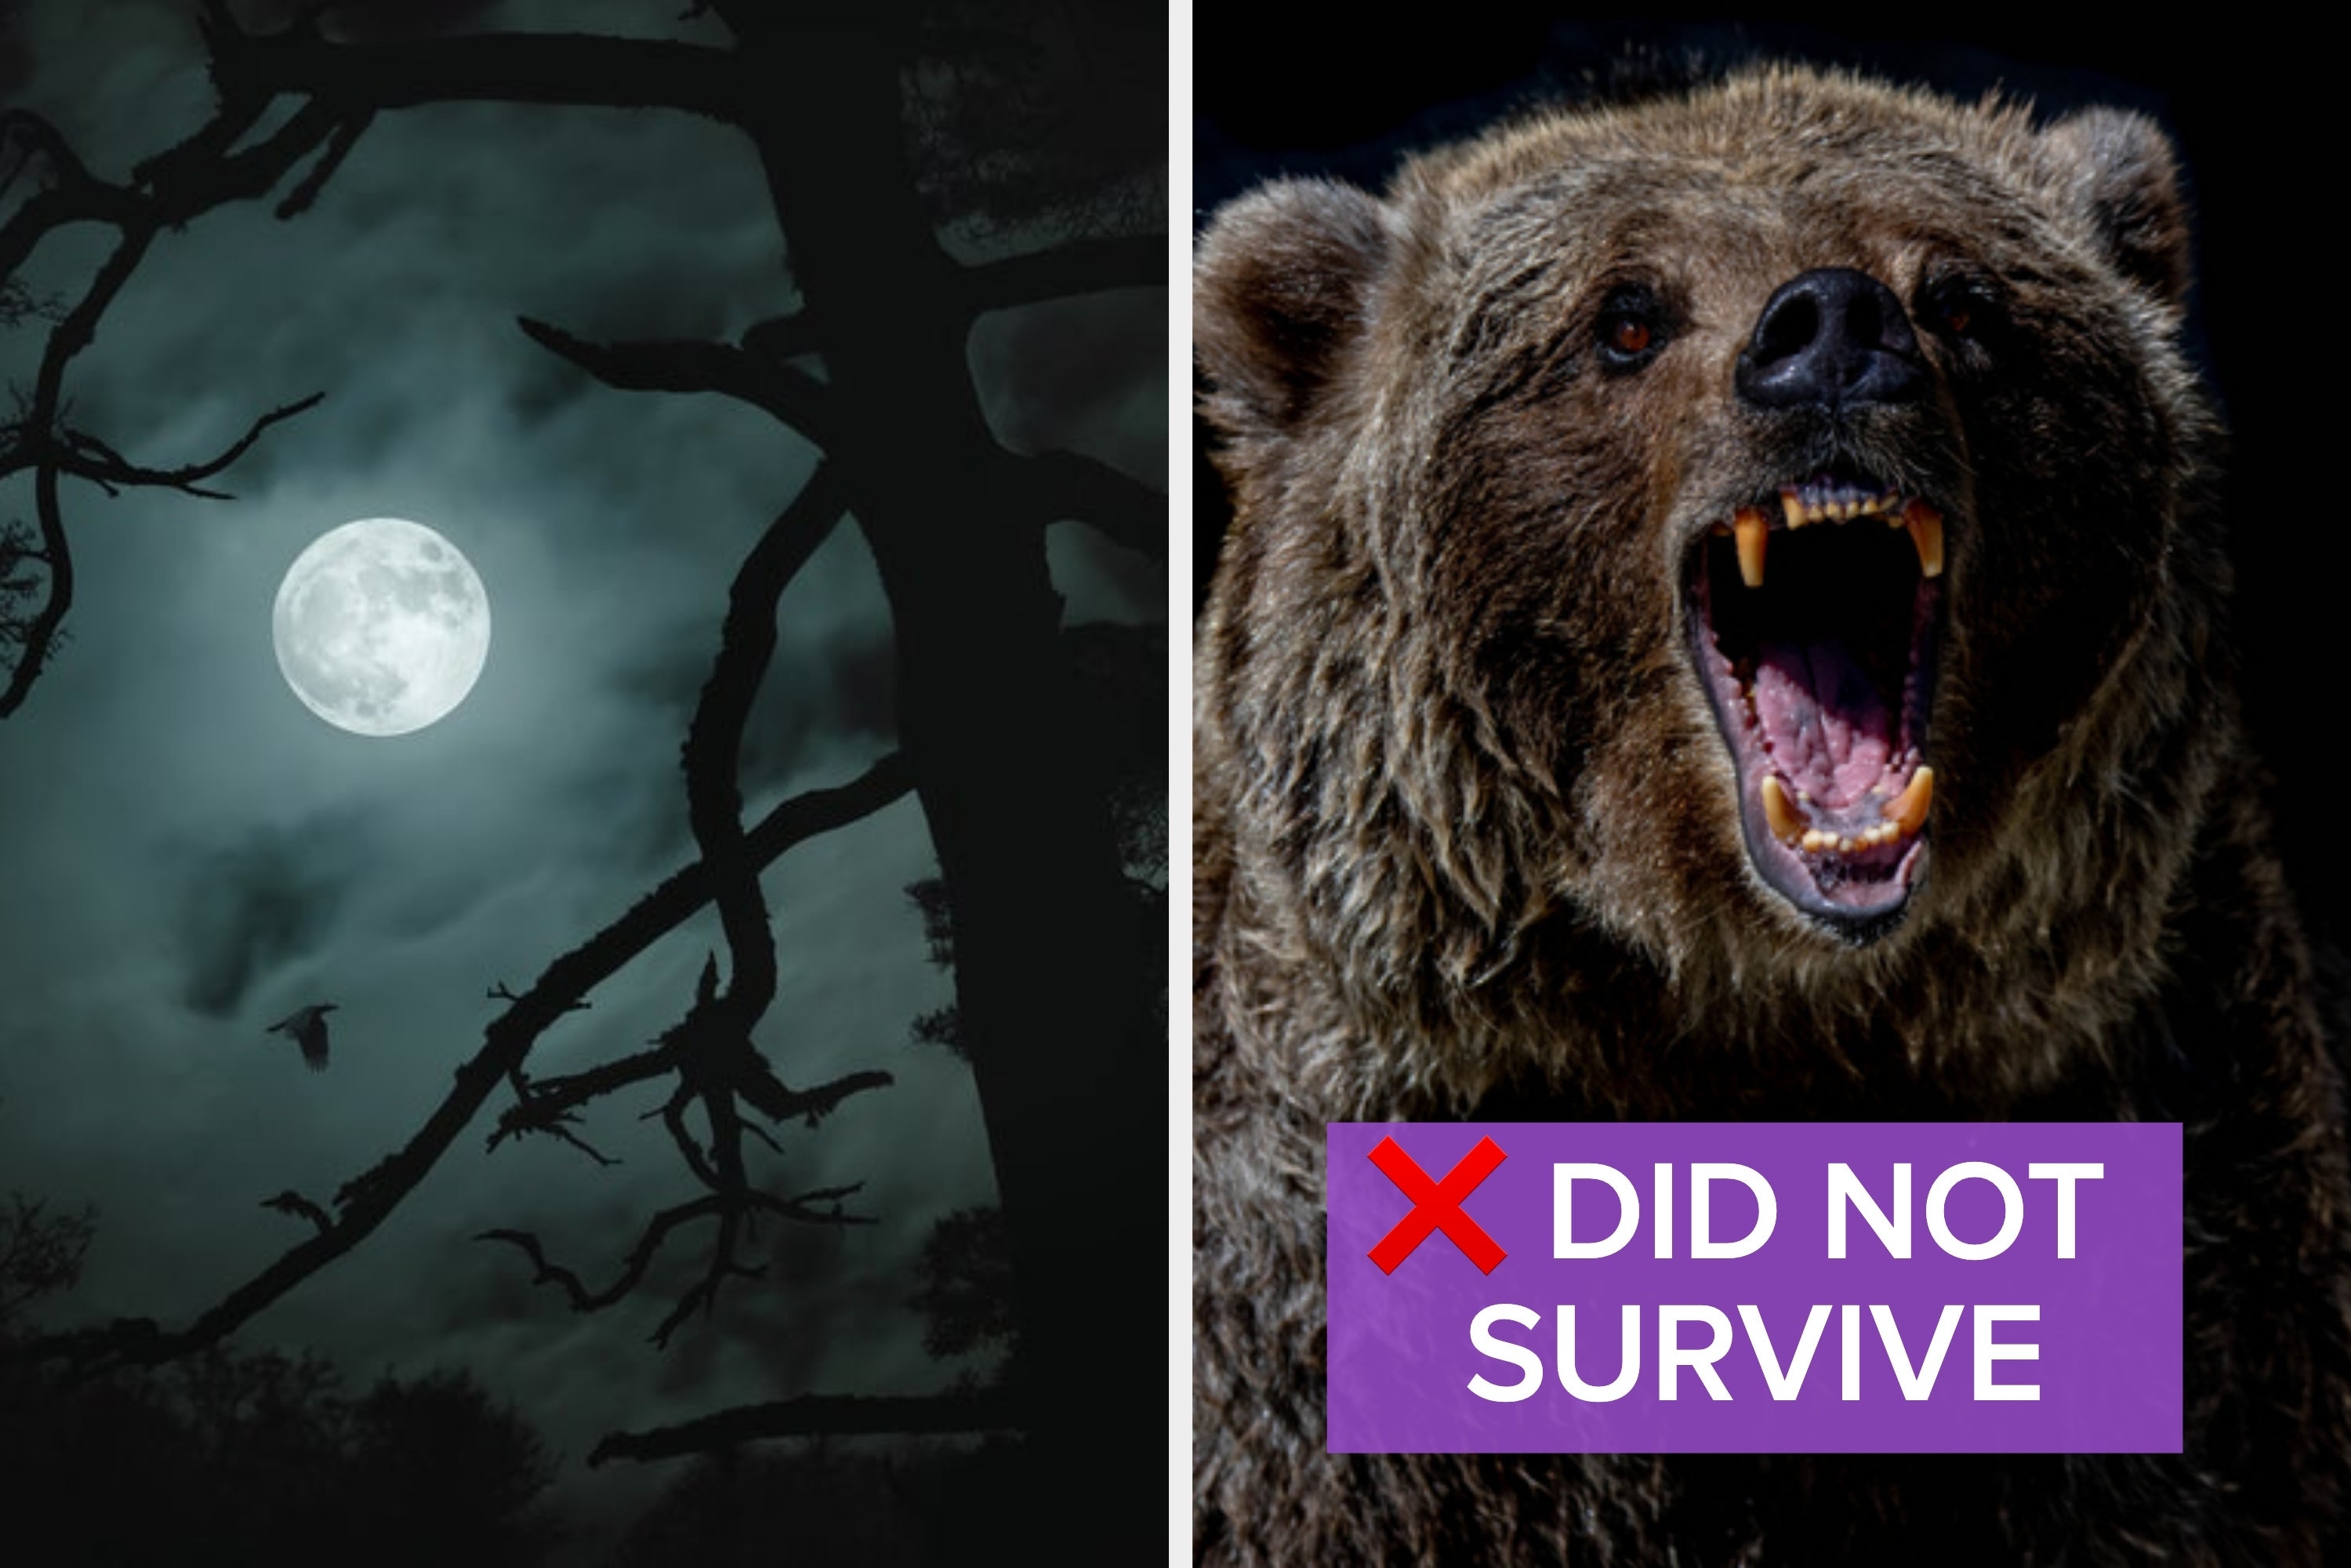 On the left, a full moon above the forest, and on the right, a bear roaring with did not survive typed under its mouth